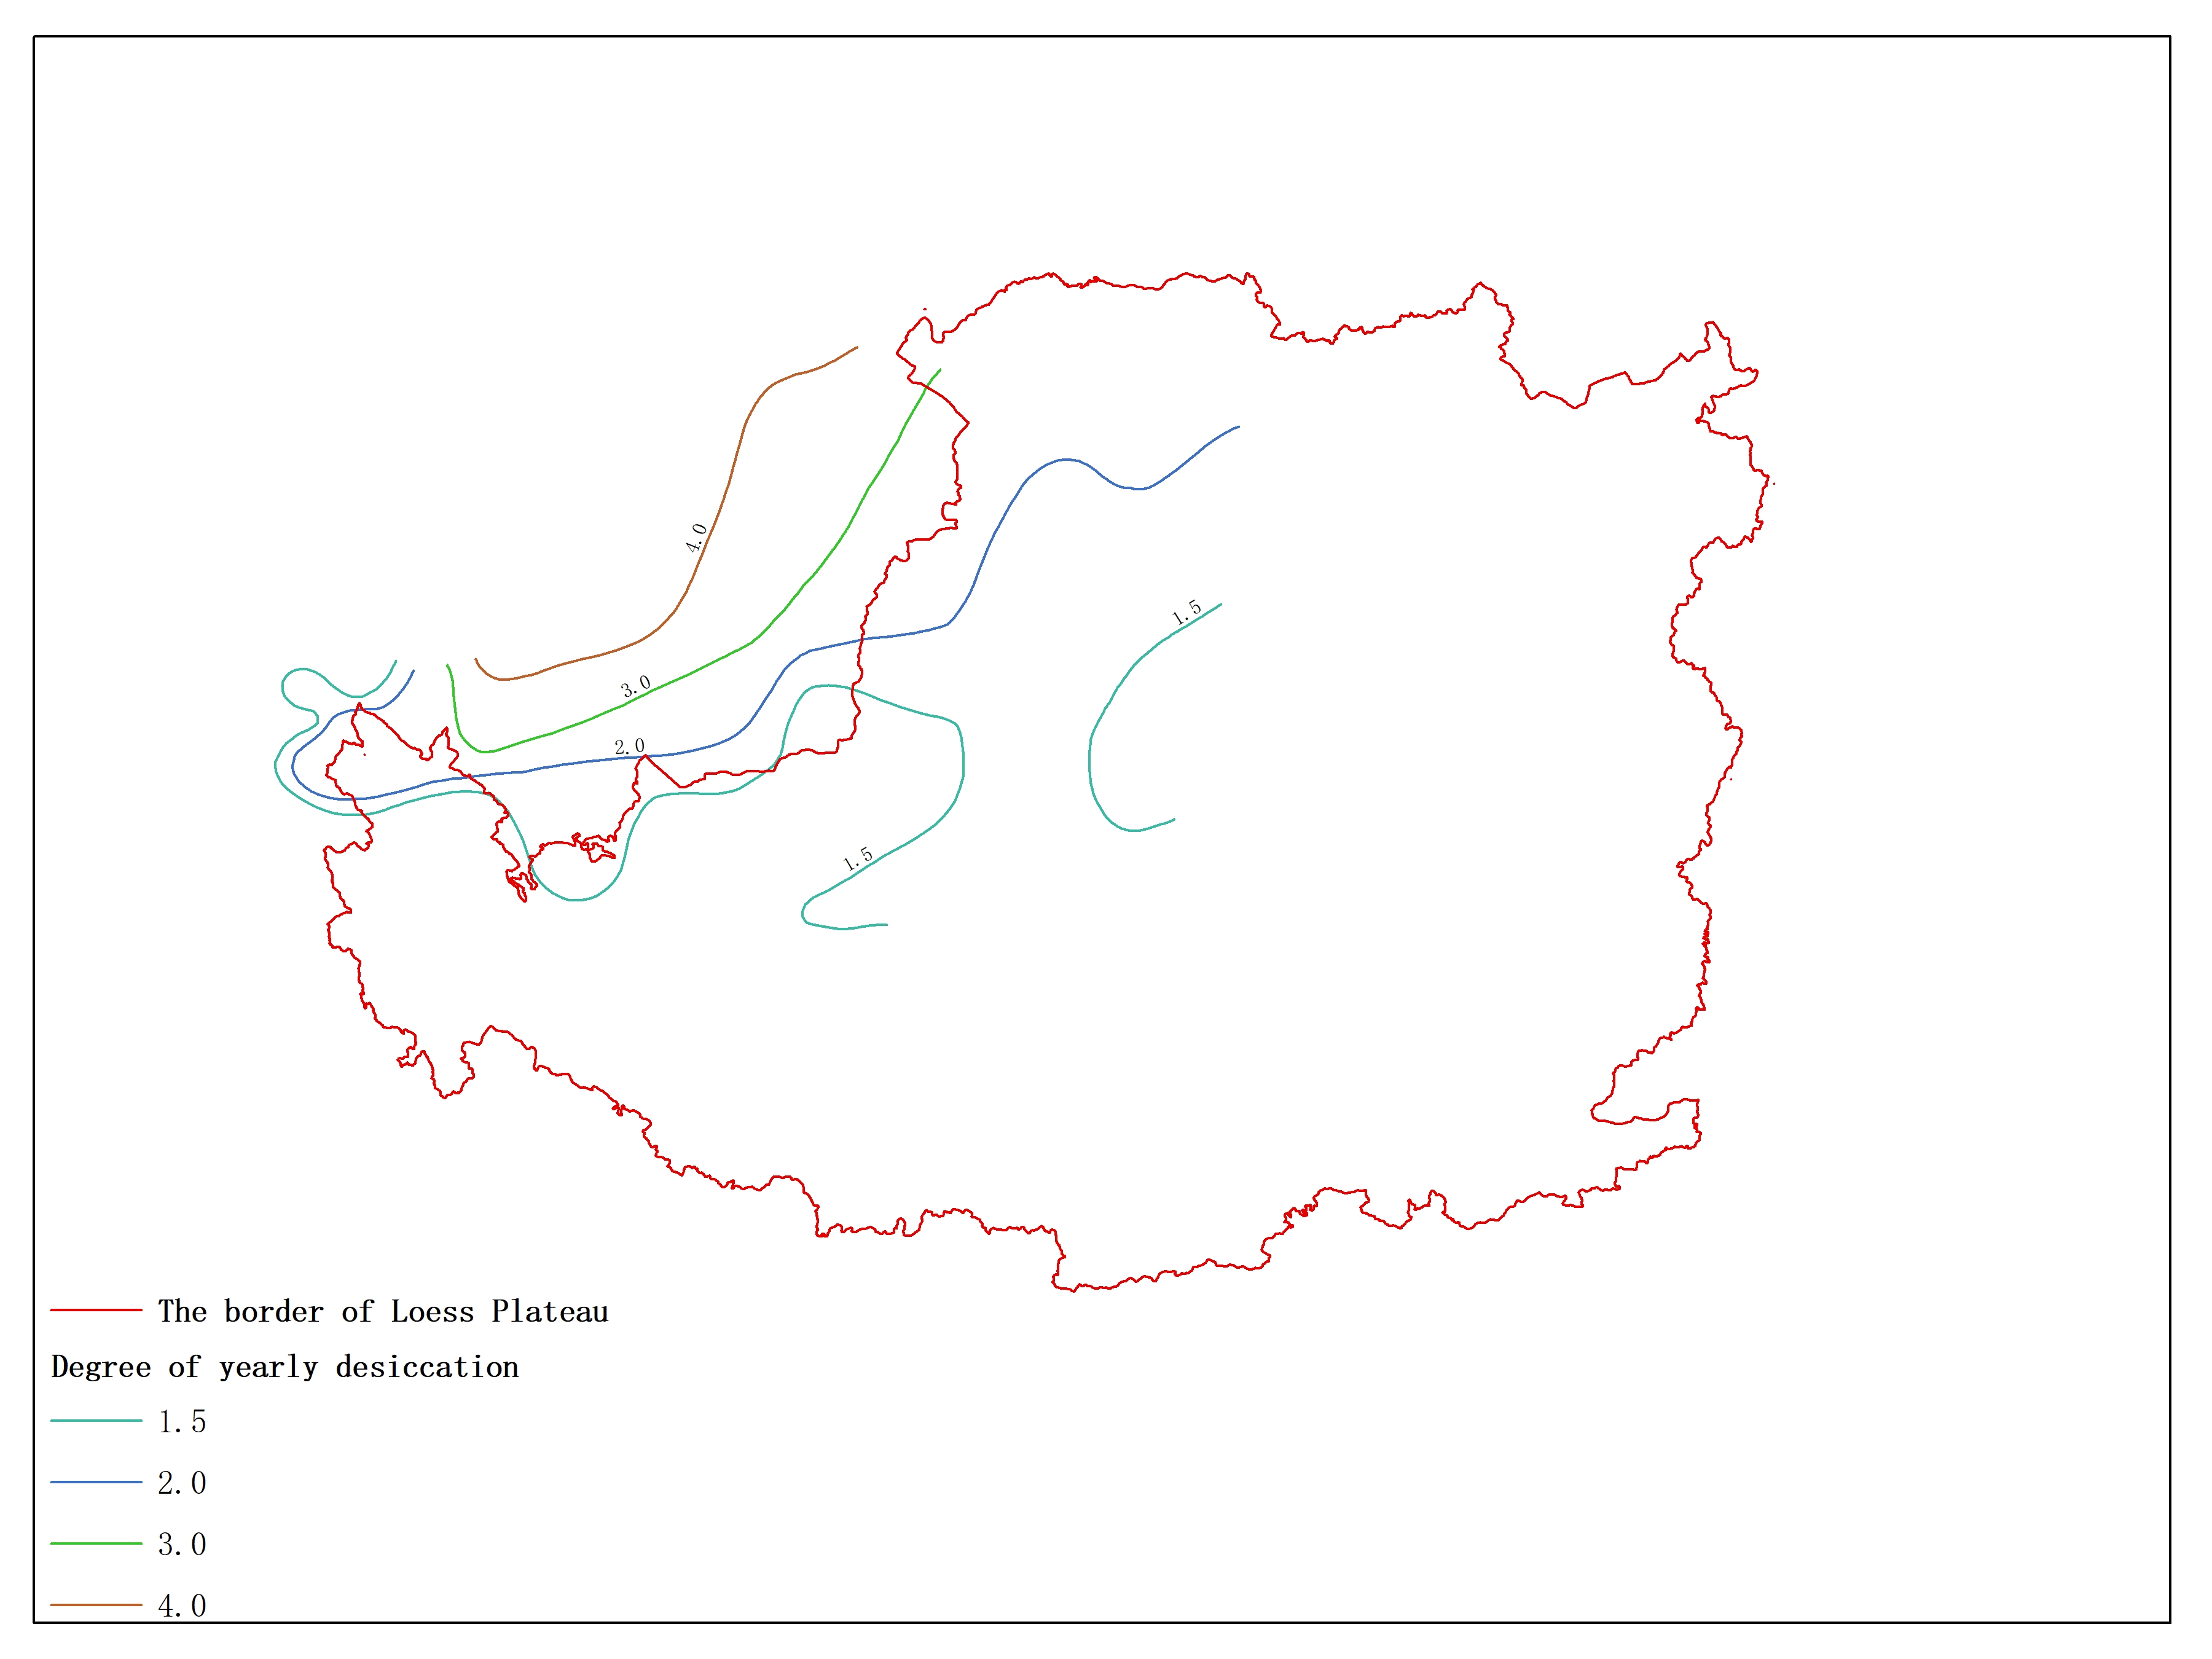 Agricultural climate resource atlas of Loess Plateau-Degree of yearly desiccation